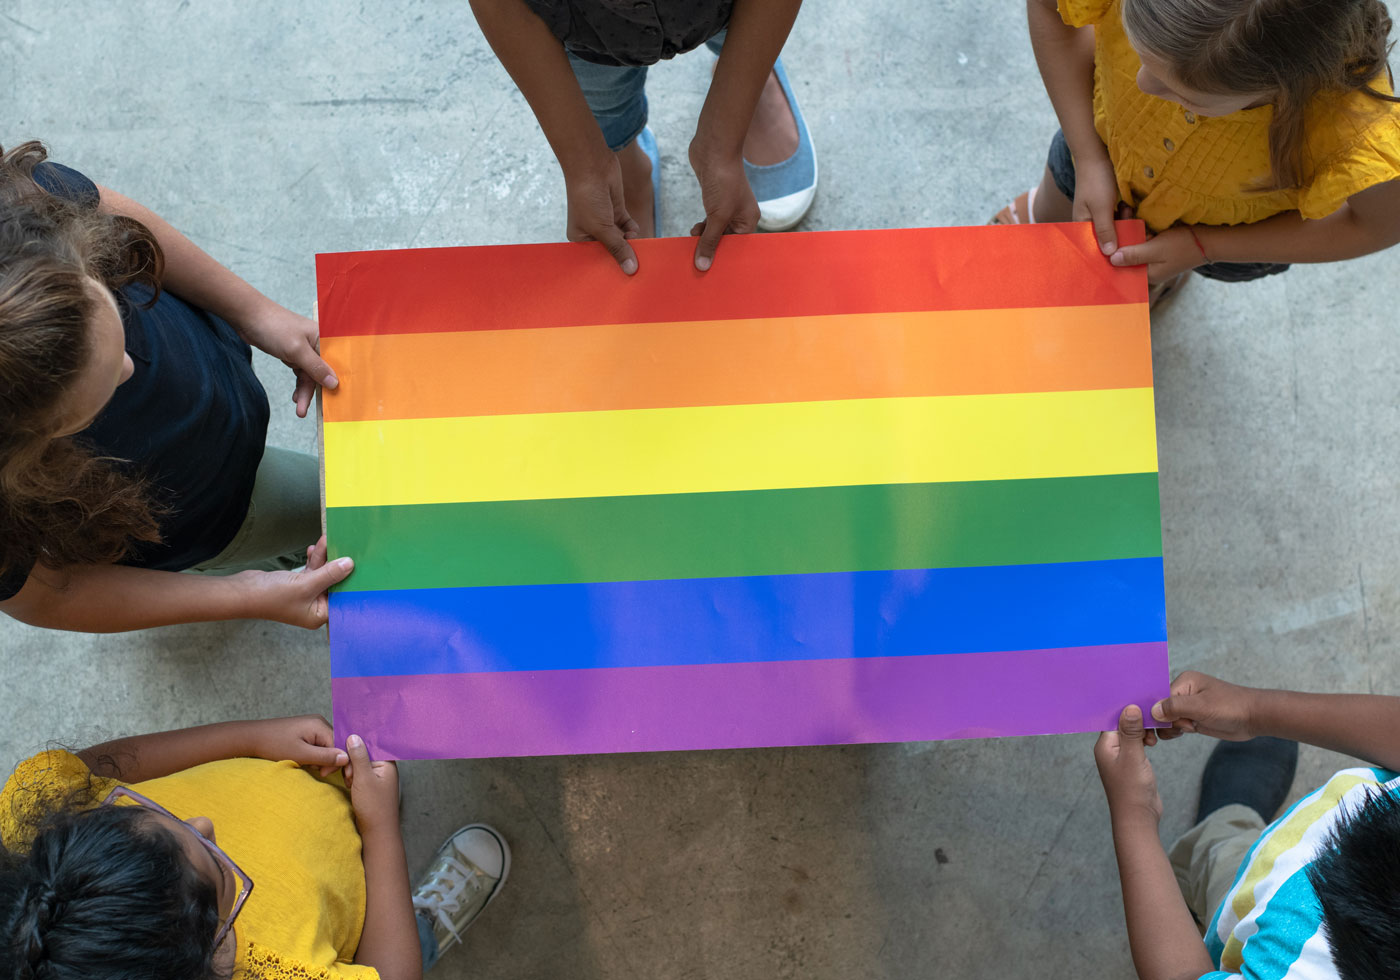 A group of five students holding up a colorful pride flag above a concrete floor